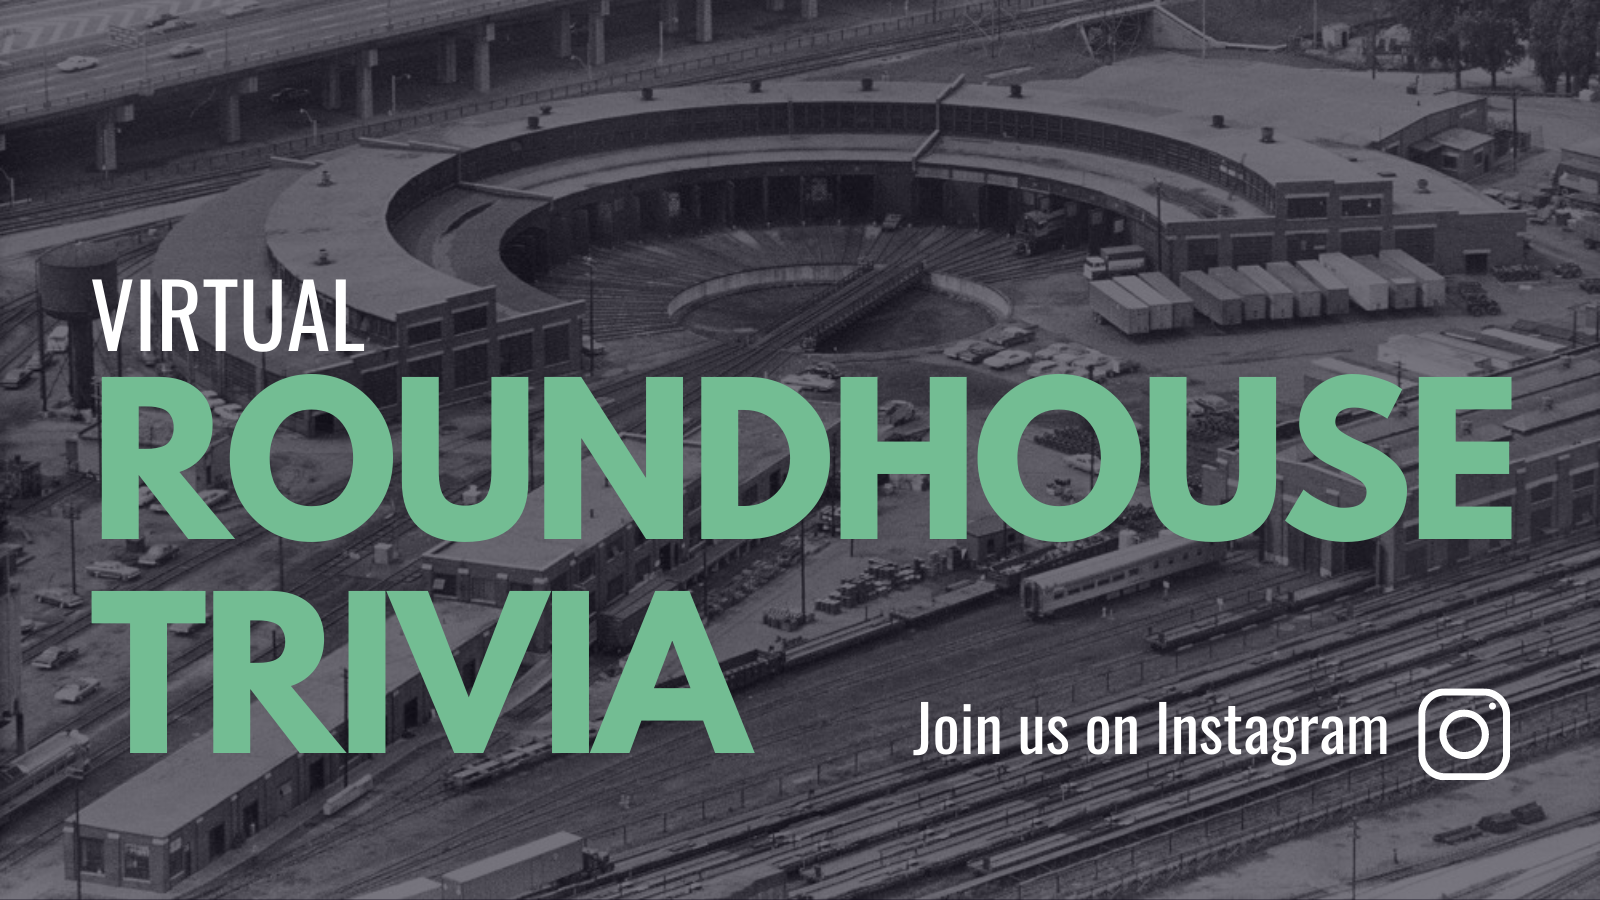 virtual roundhouse trivia. Join us on Instagram!